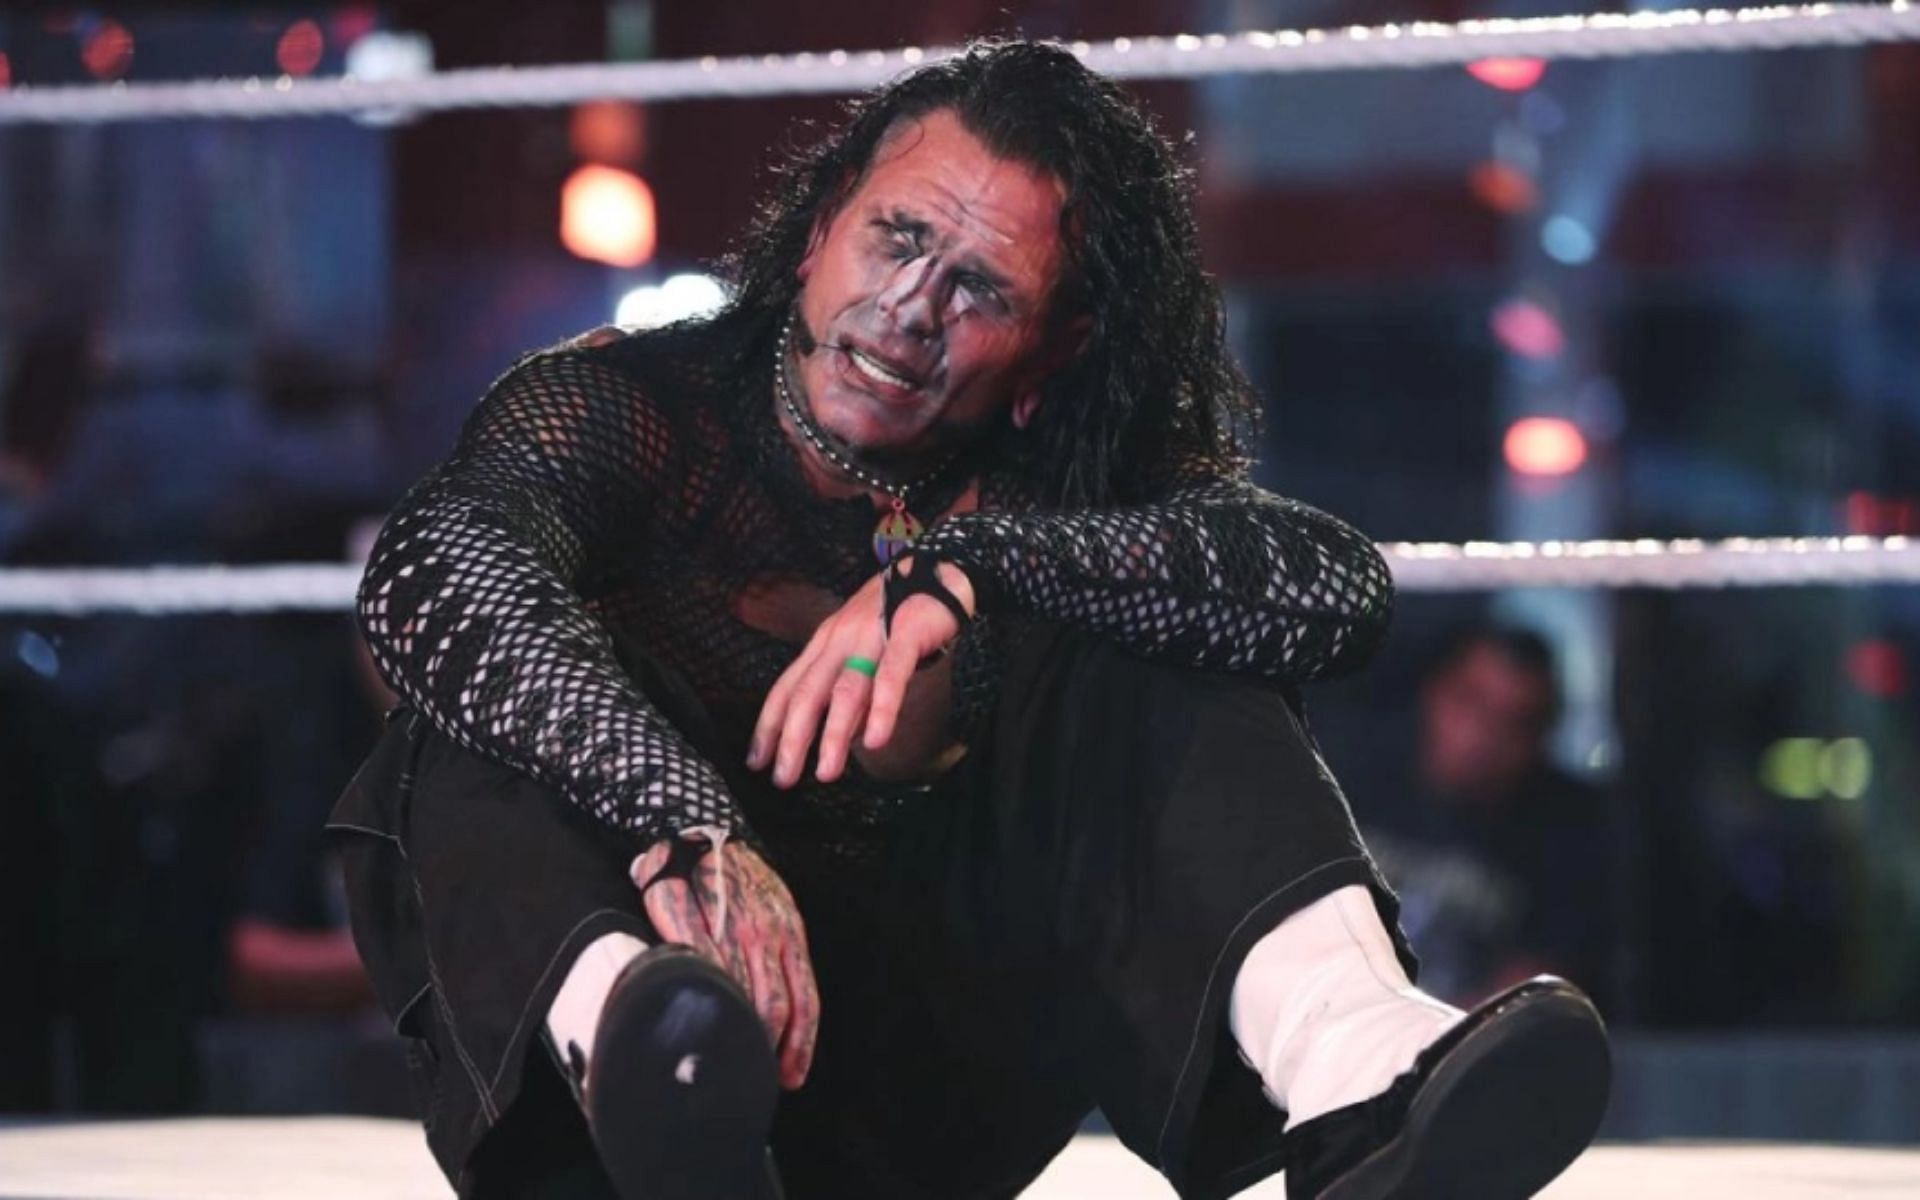 WWE legend Jeff Hardy is still suspended by AEW due to his arrest last June.